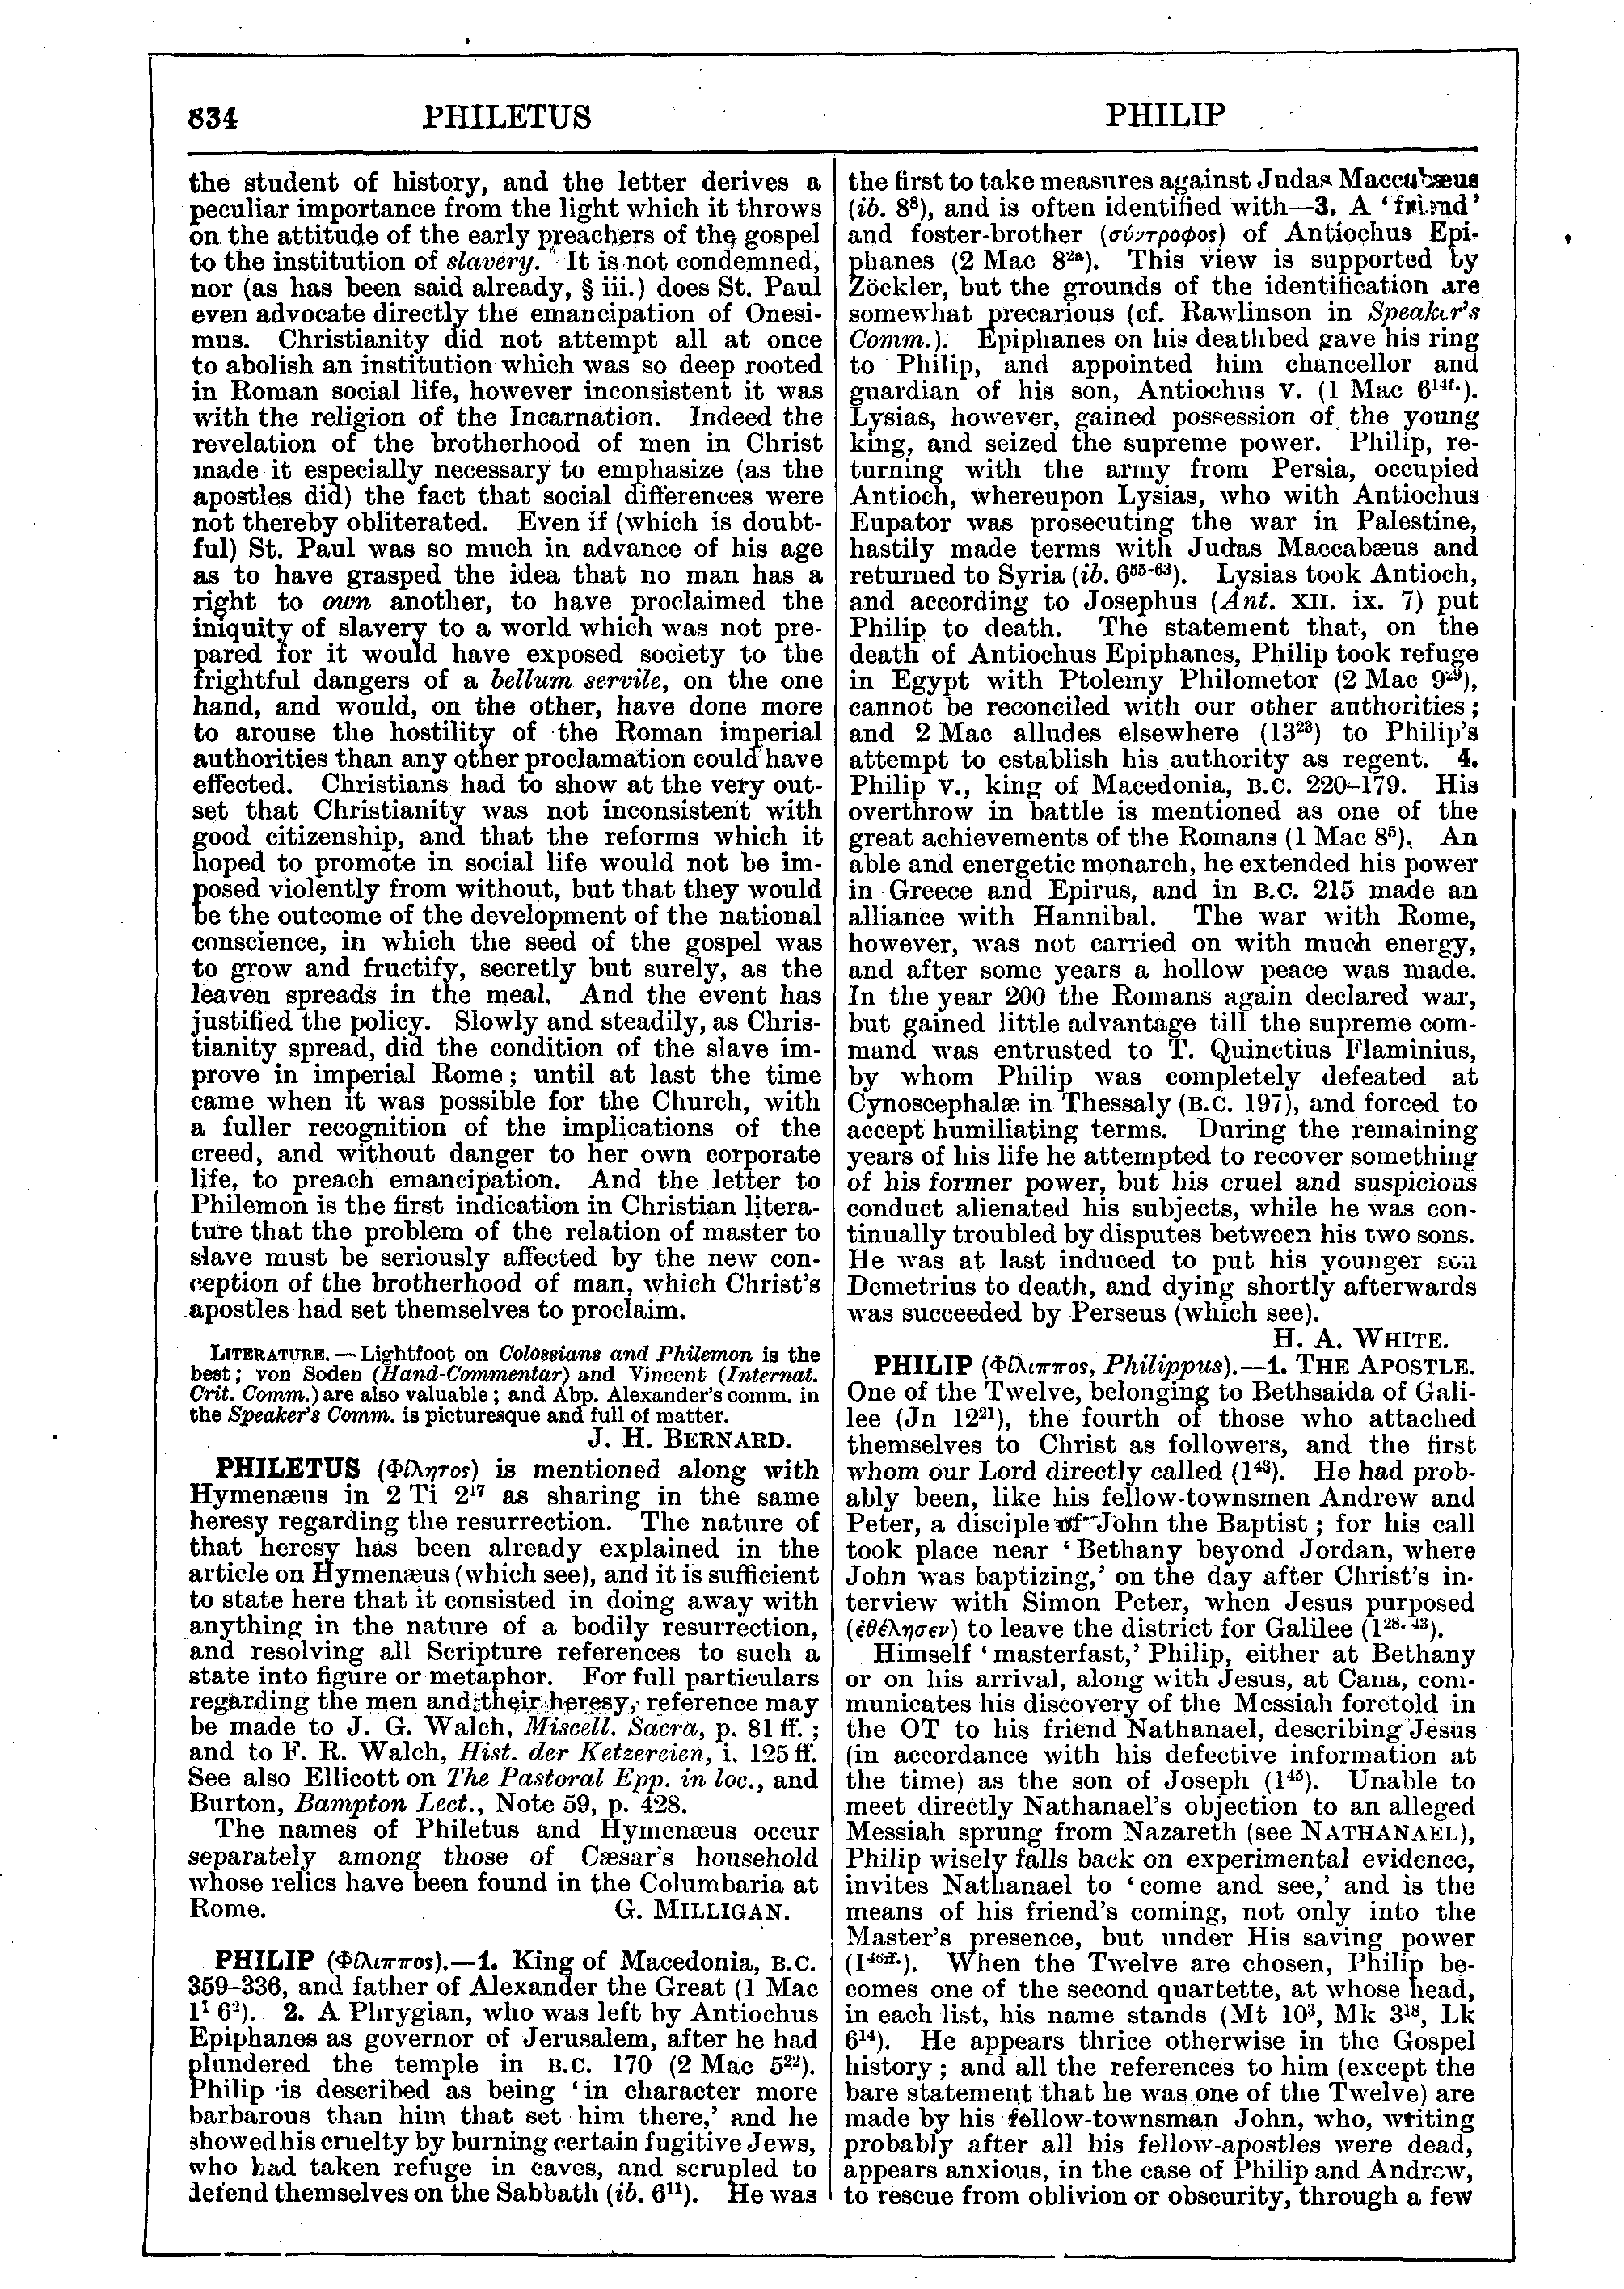 Image of page 834